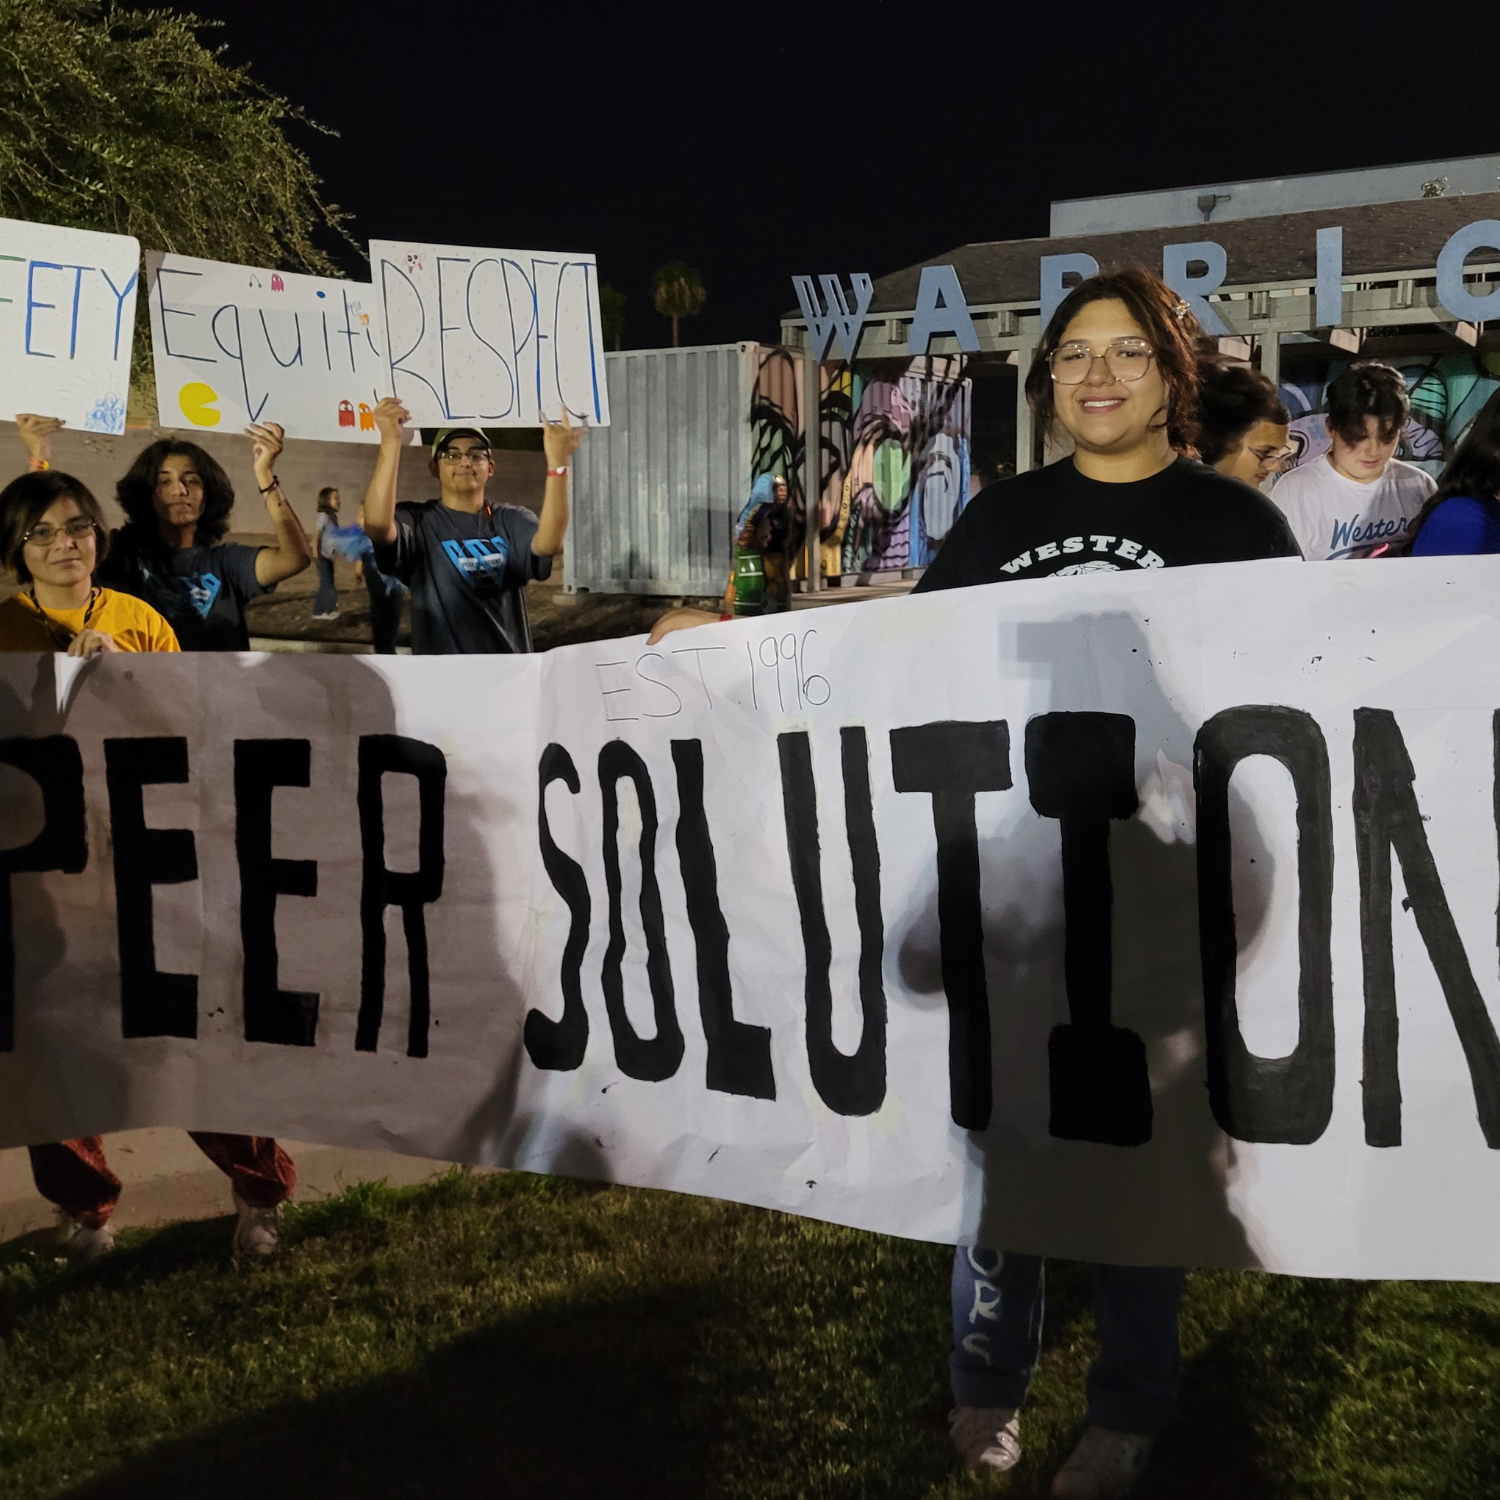 a group of people holding a sign that says peer solution.